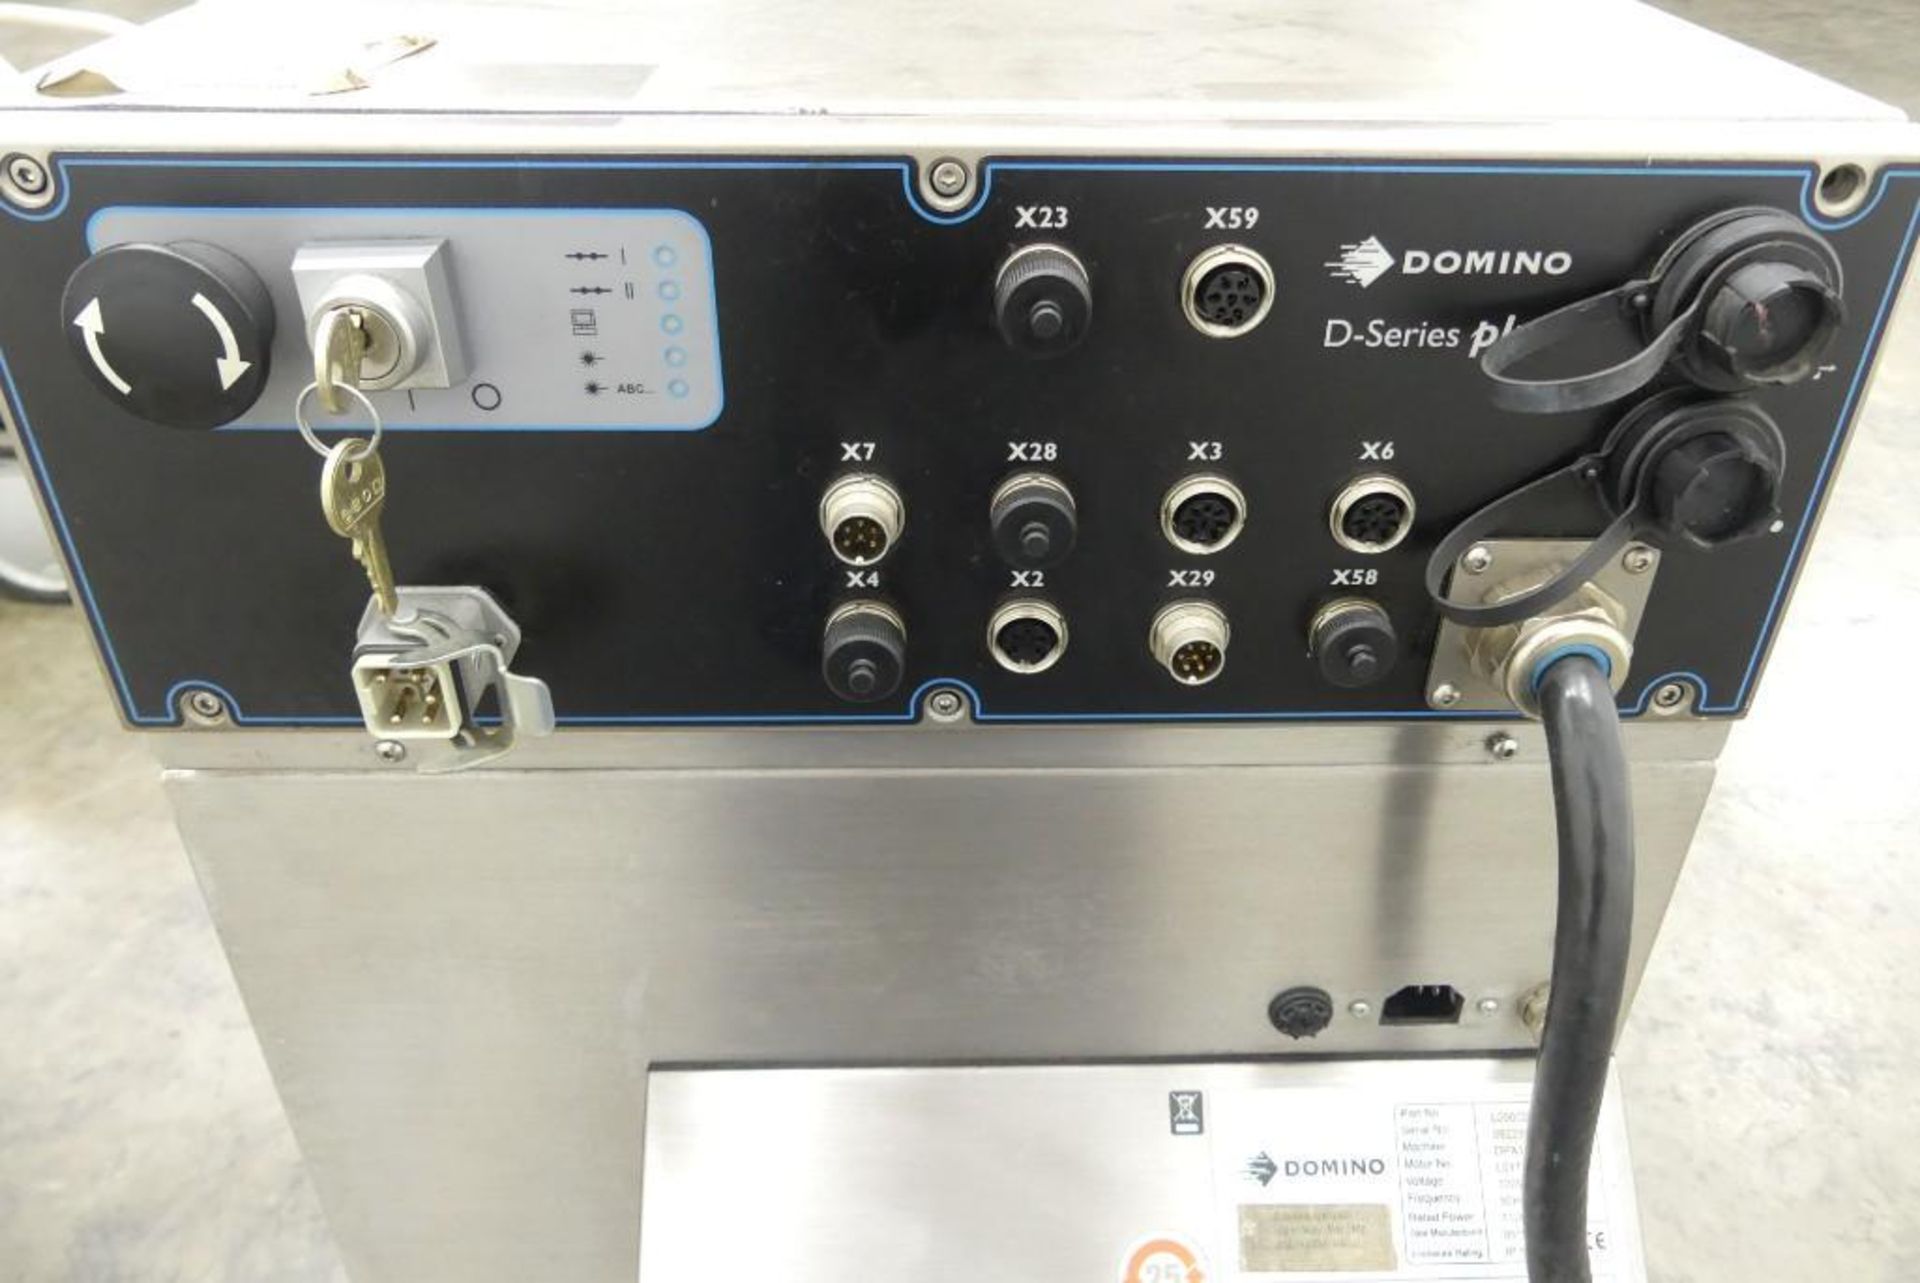 Domino D300+ Laser Coder DPX1000 Fume Extractor - Image 7 of 15